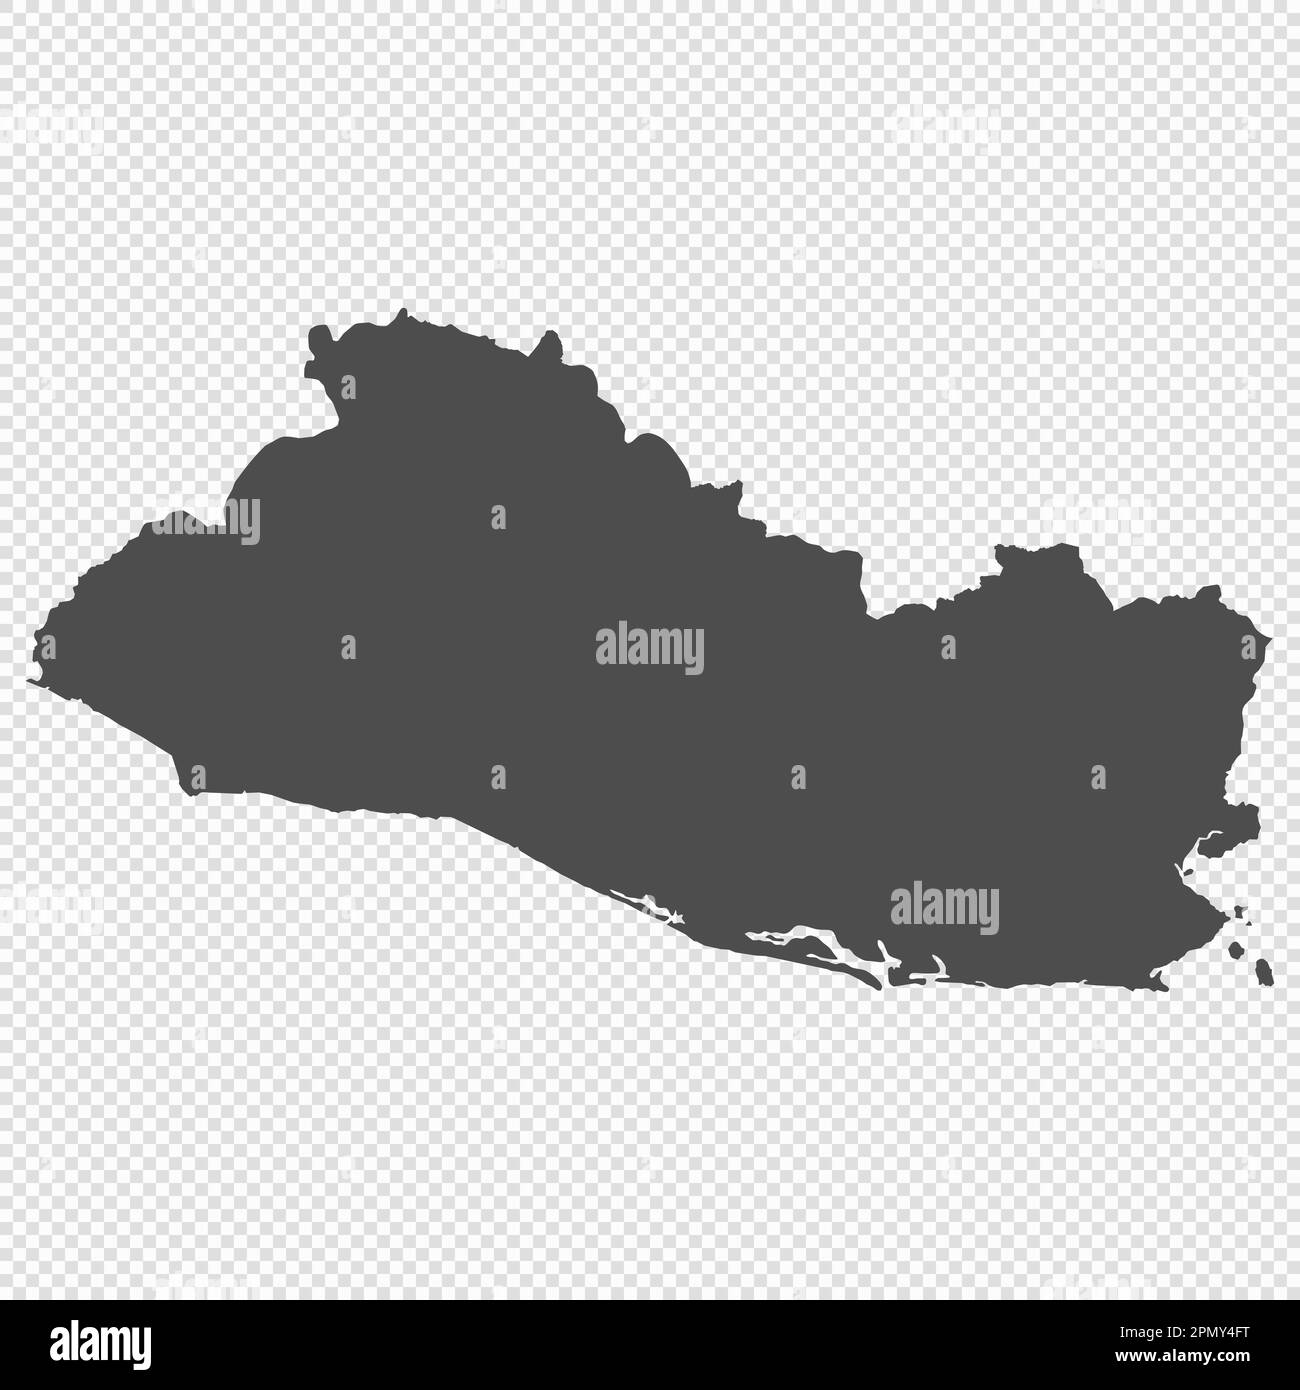 High detailed isolated map - El Salvador Stock Vector